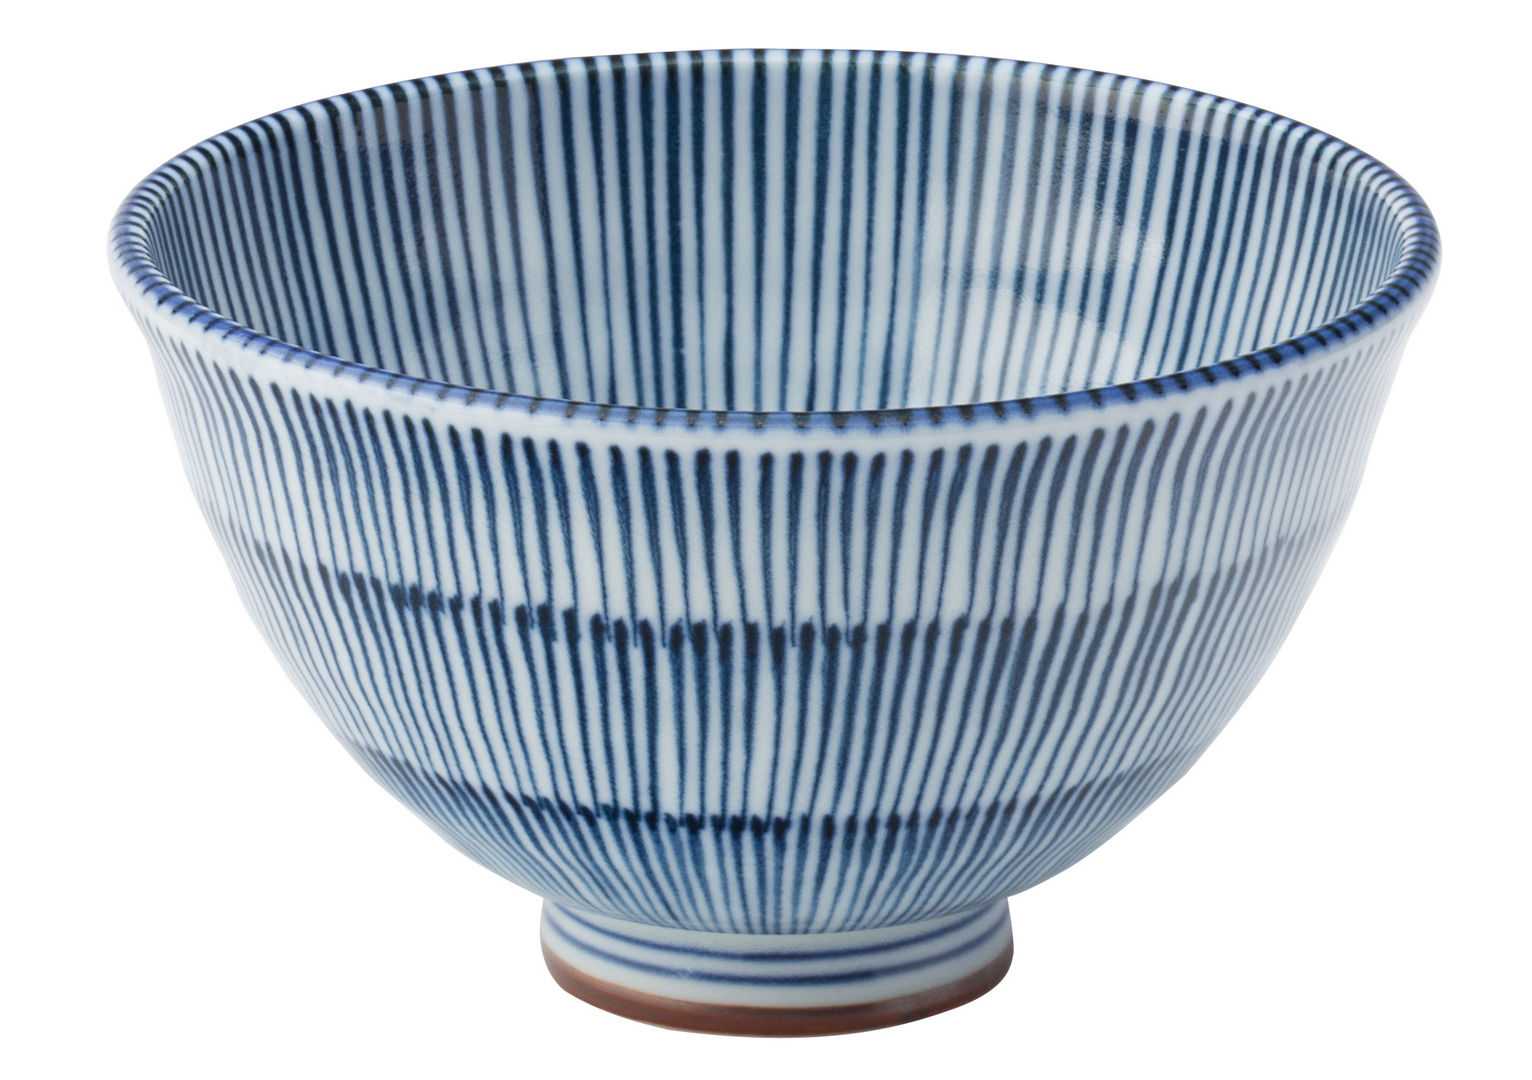 Urchin Footed Bowl 4.75 (12cm) - CT7087-000000-B01006 (Pack of 6)